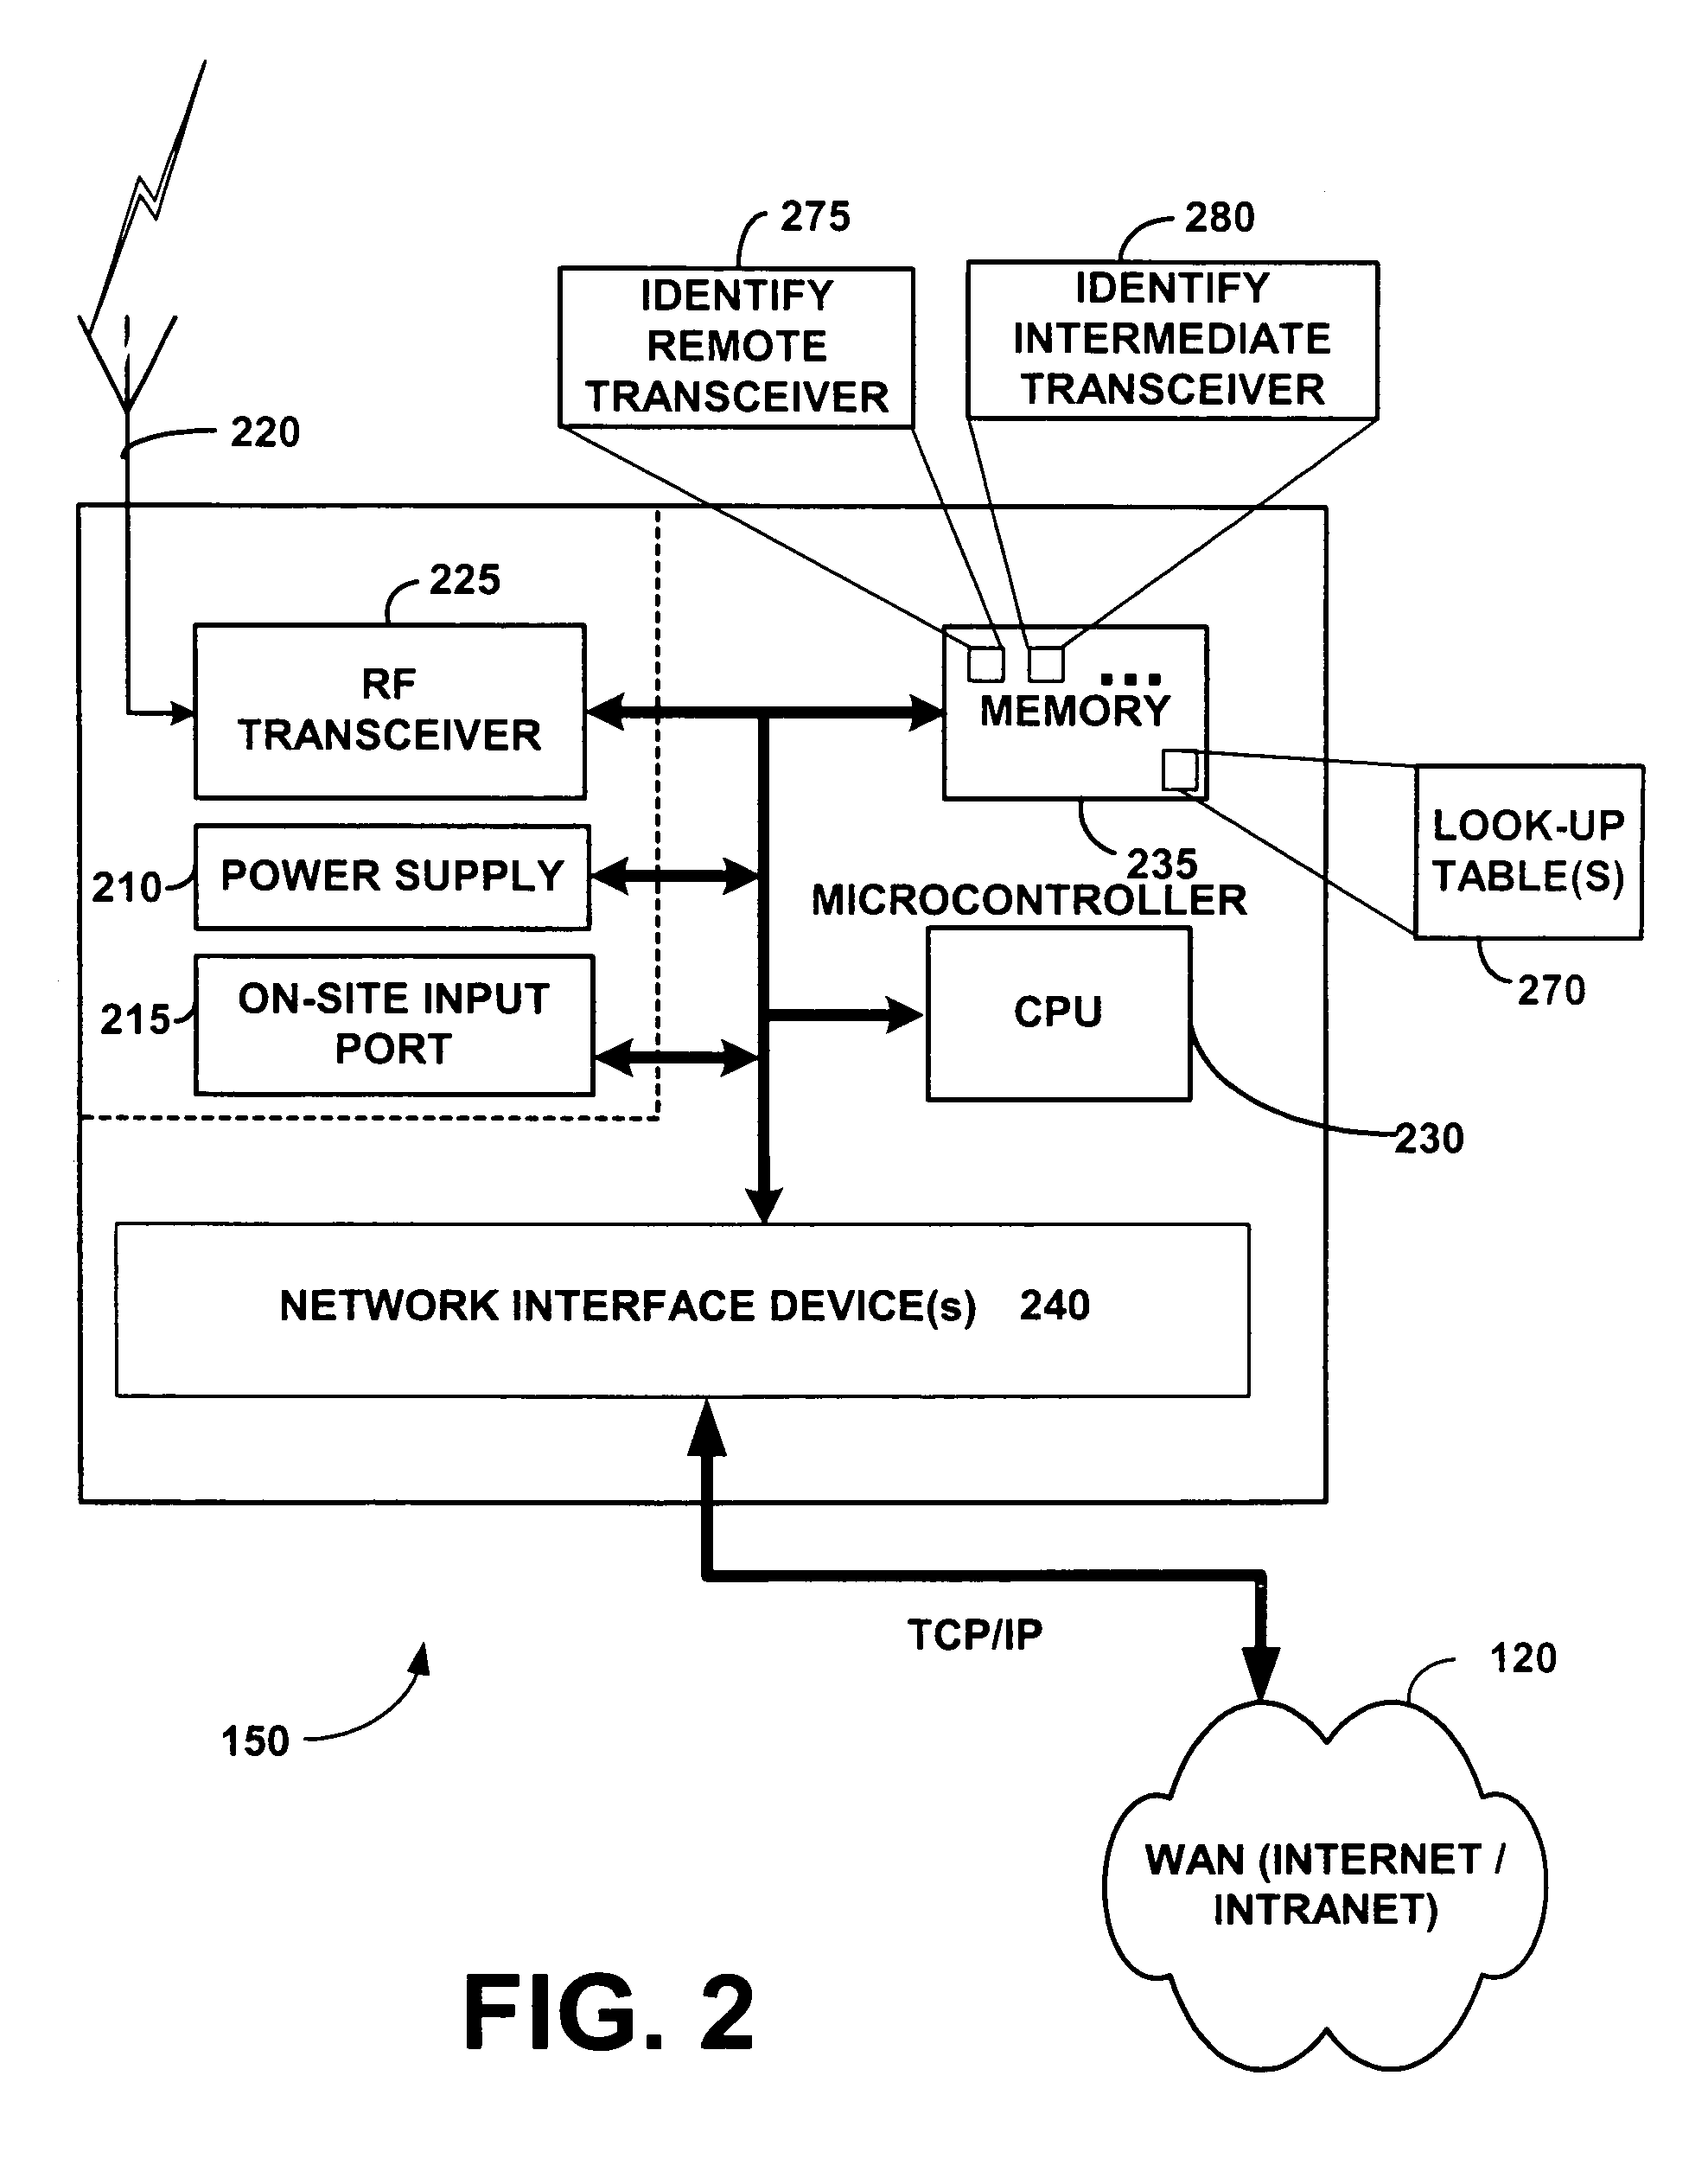 System and method for controlling communication between a host computer and communication devices associated with remote devices in an automated monitoring system